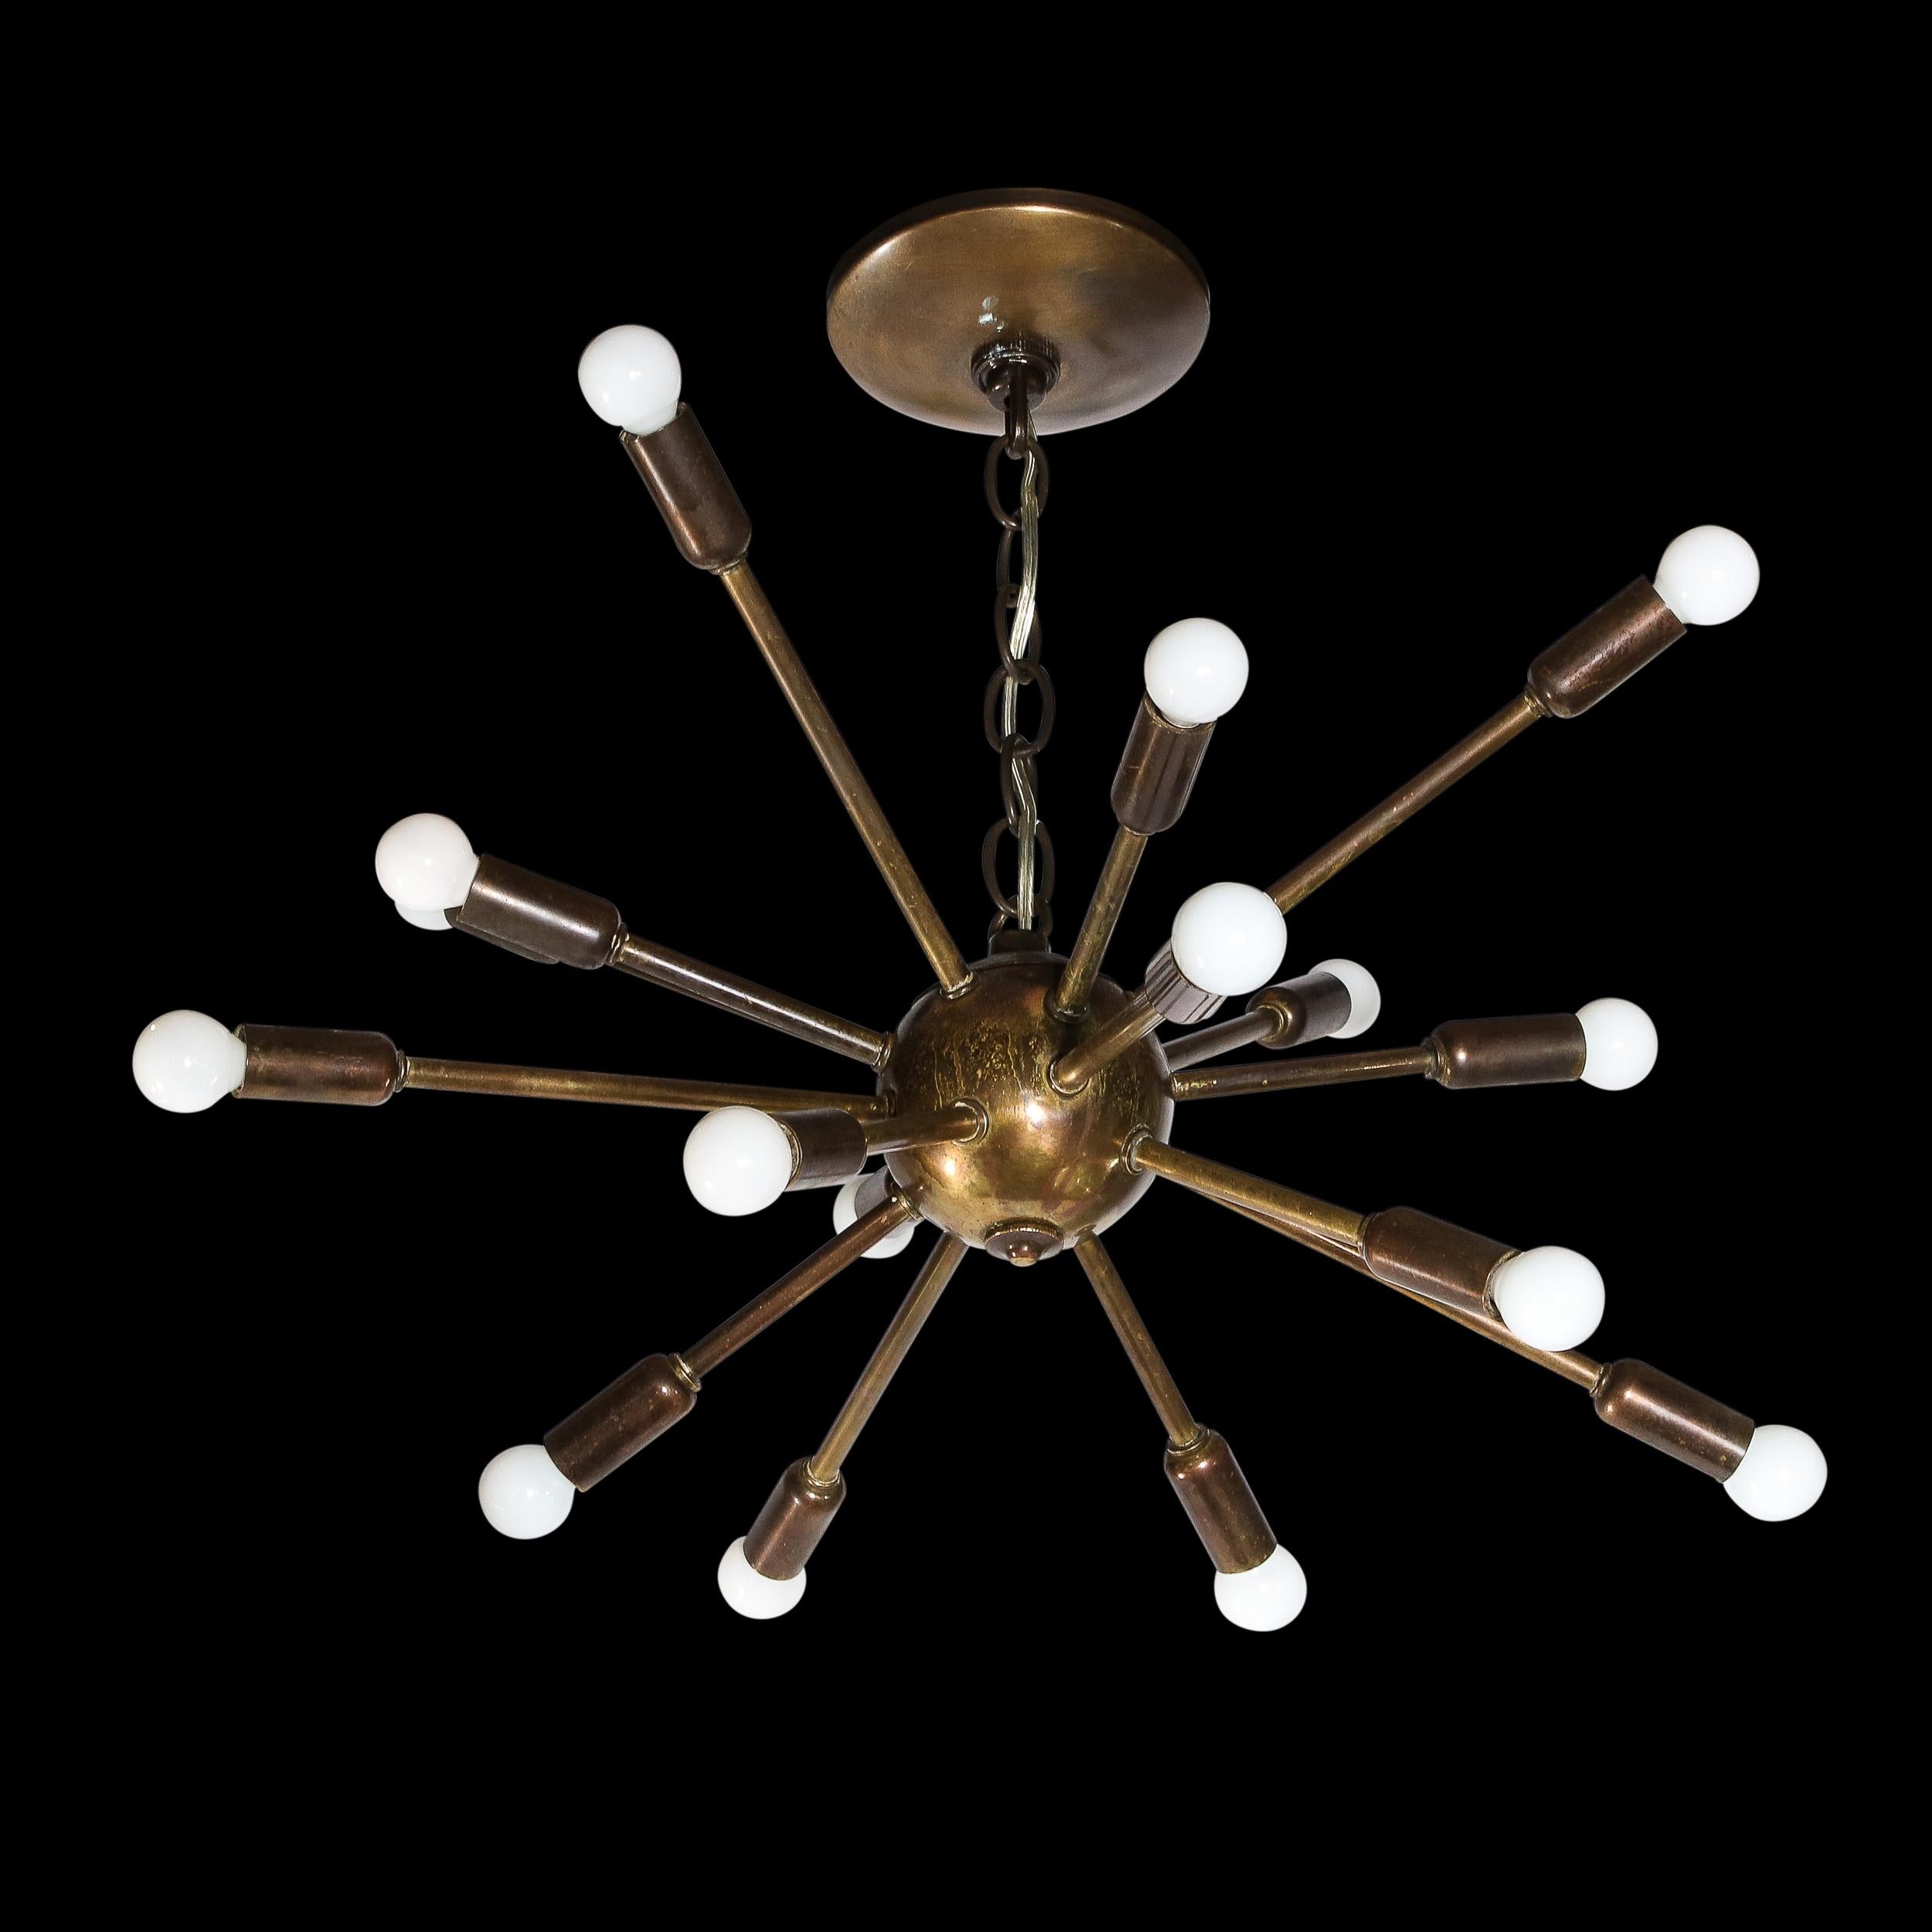 This refined and graphic Sputnik chandelier was crafted in Italy, circa 1960. It features sixteen arms emanating outwards from a spherical body capped on the end with candelabra bulbs. With its sculptural Silhouette, clean modernist lines, and